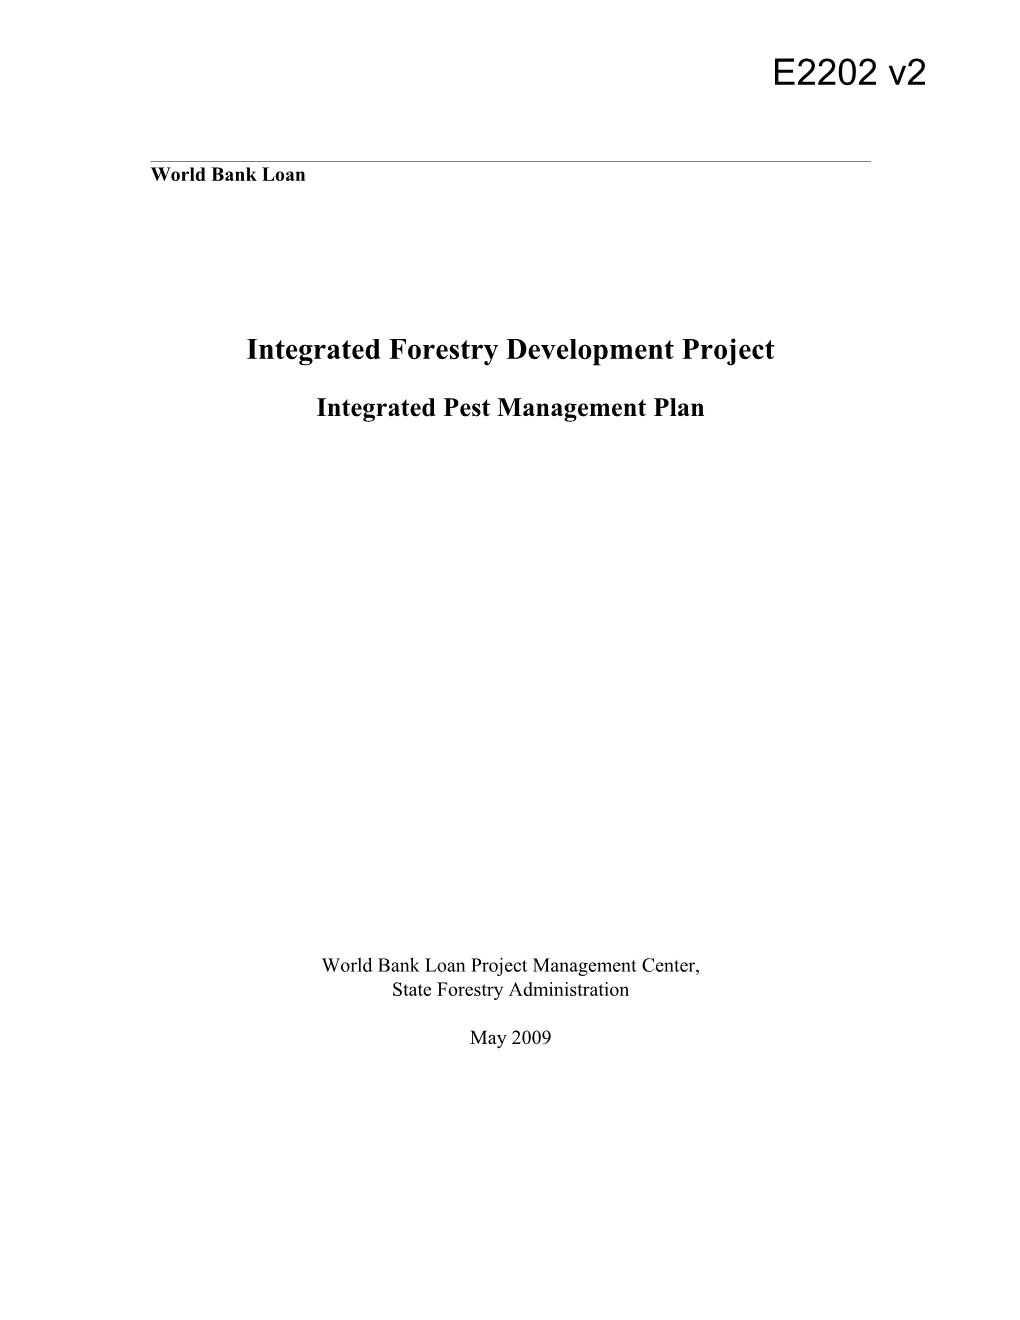 Integrated Forestry Development Project